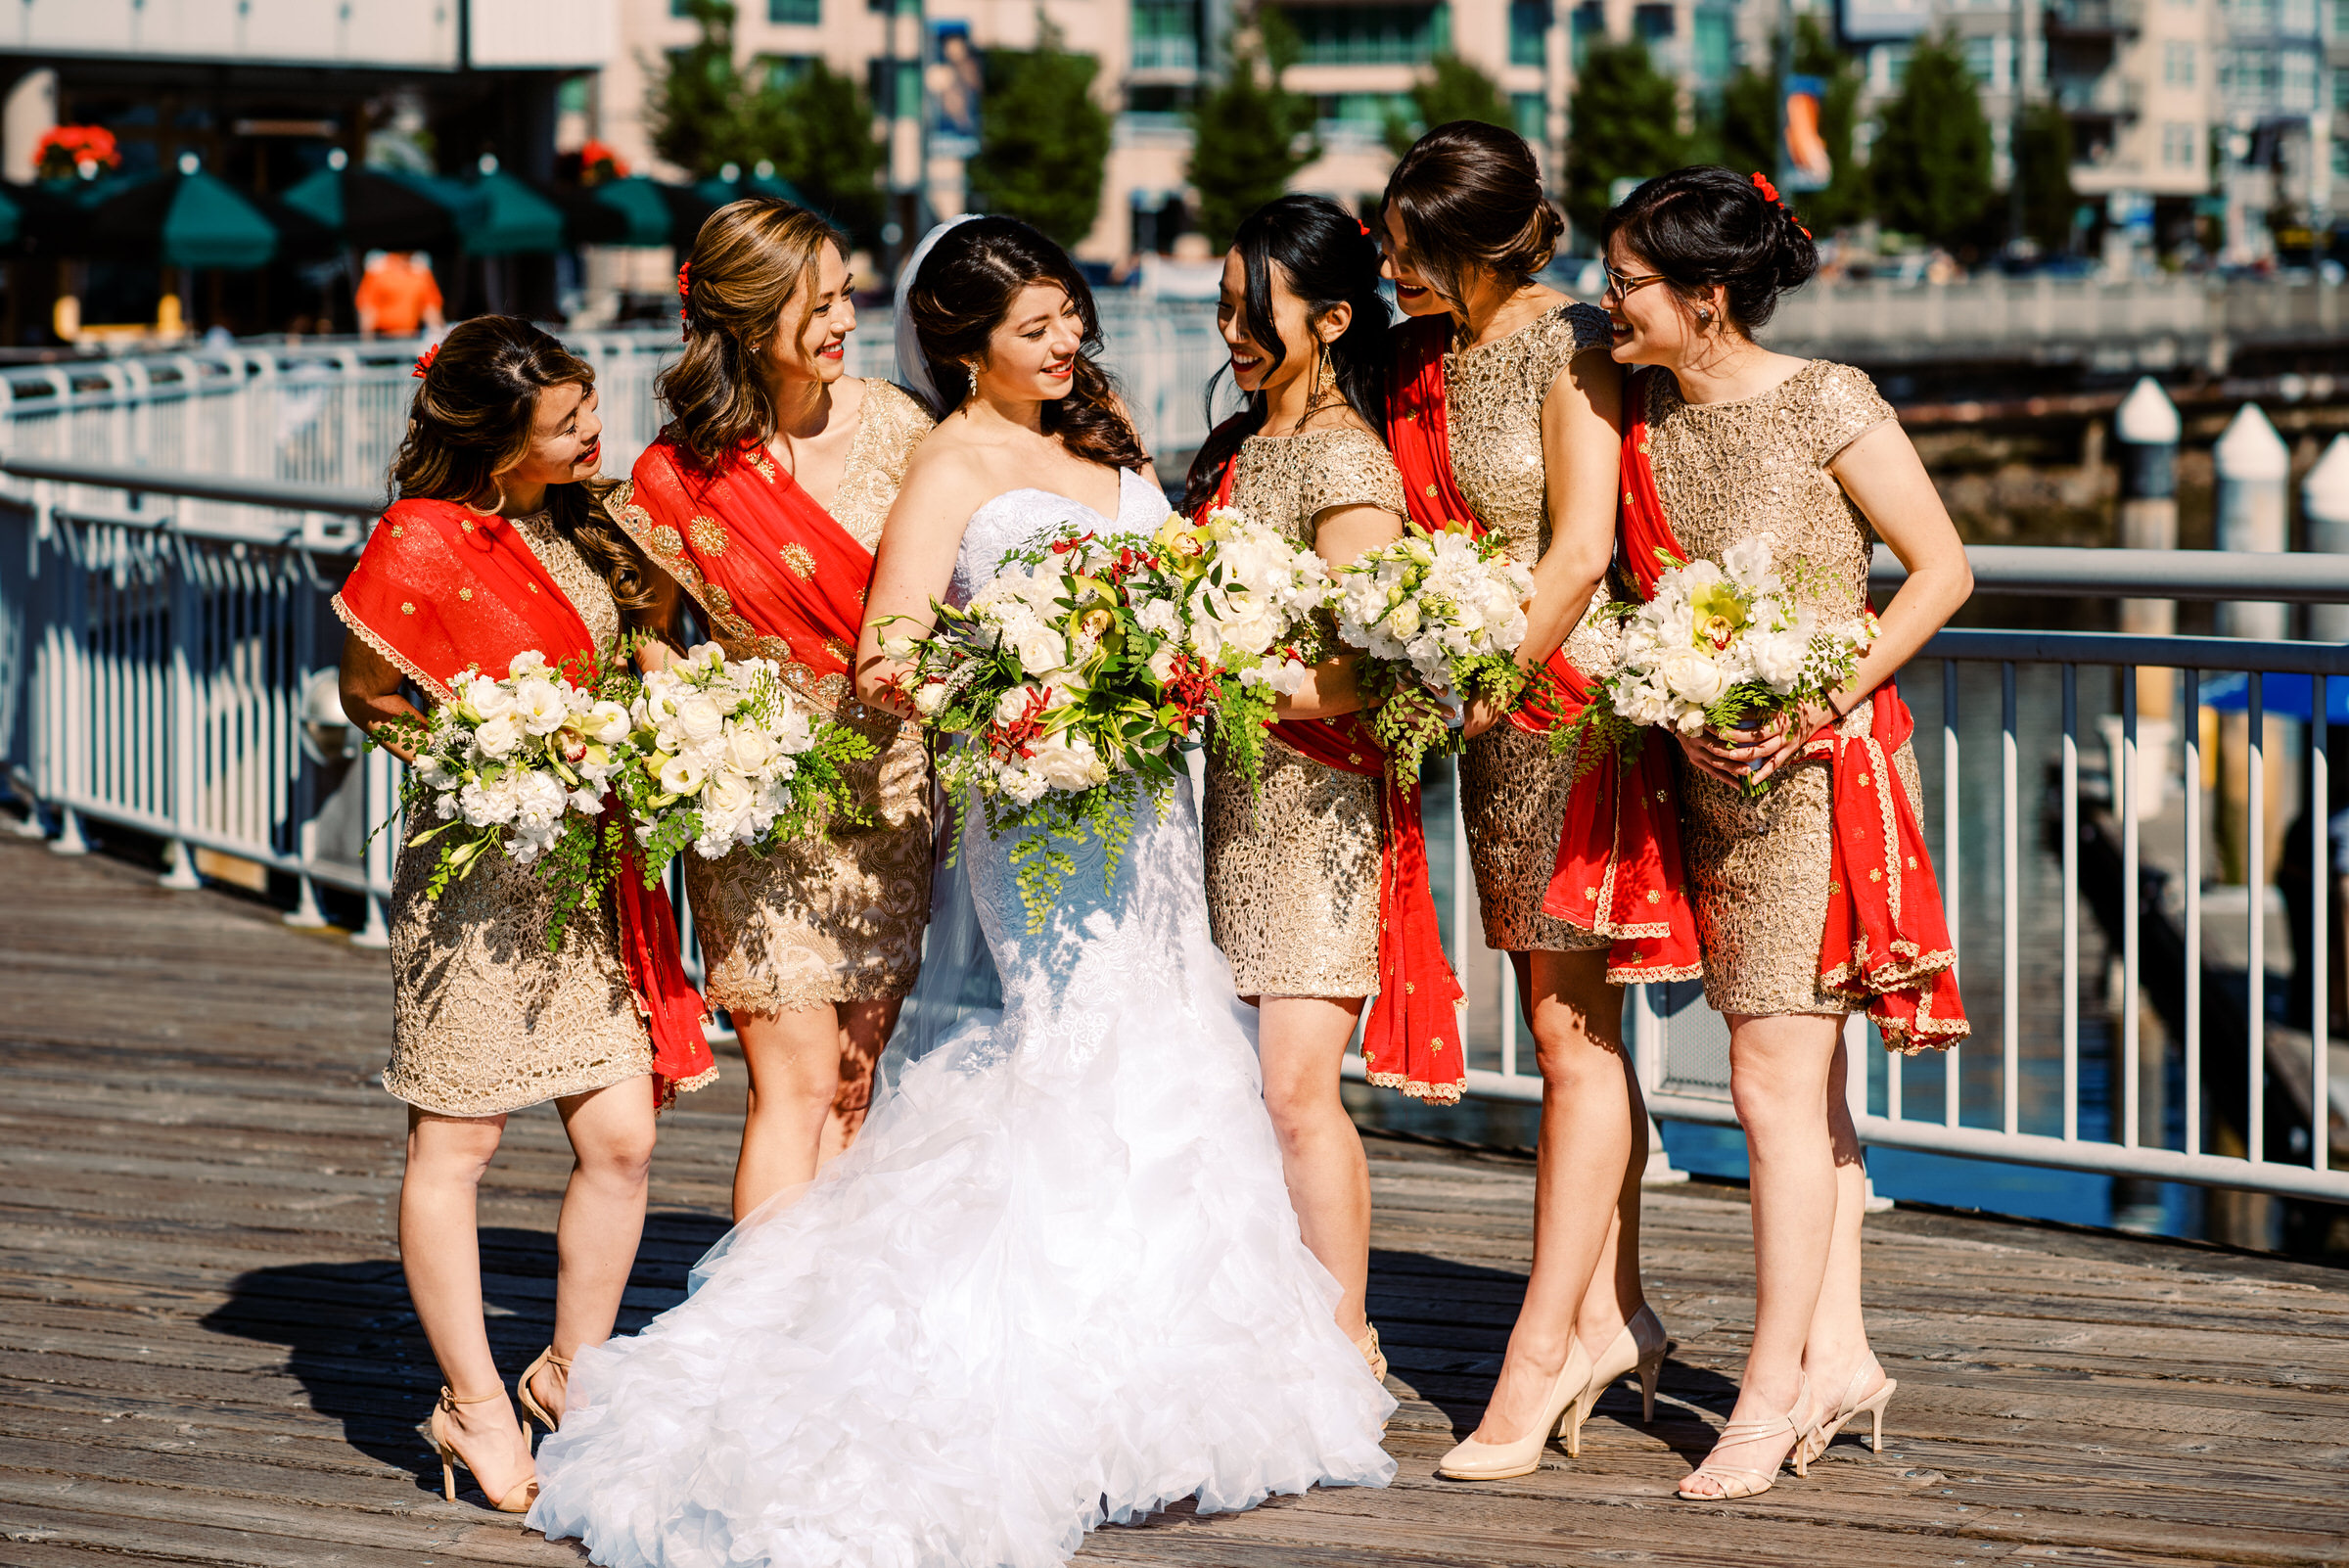 Bride Kelly with her colorful beautiful bridesmaids in red and gold